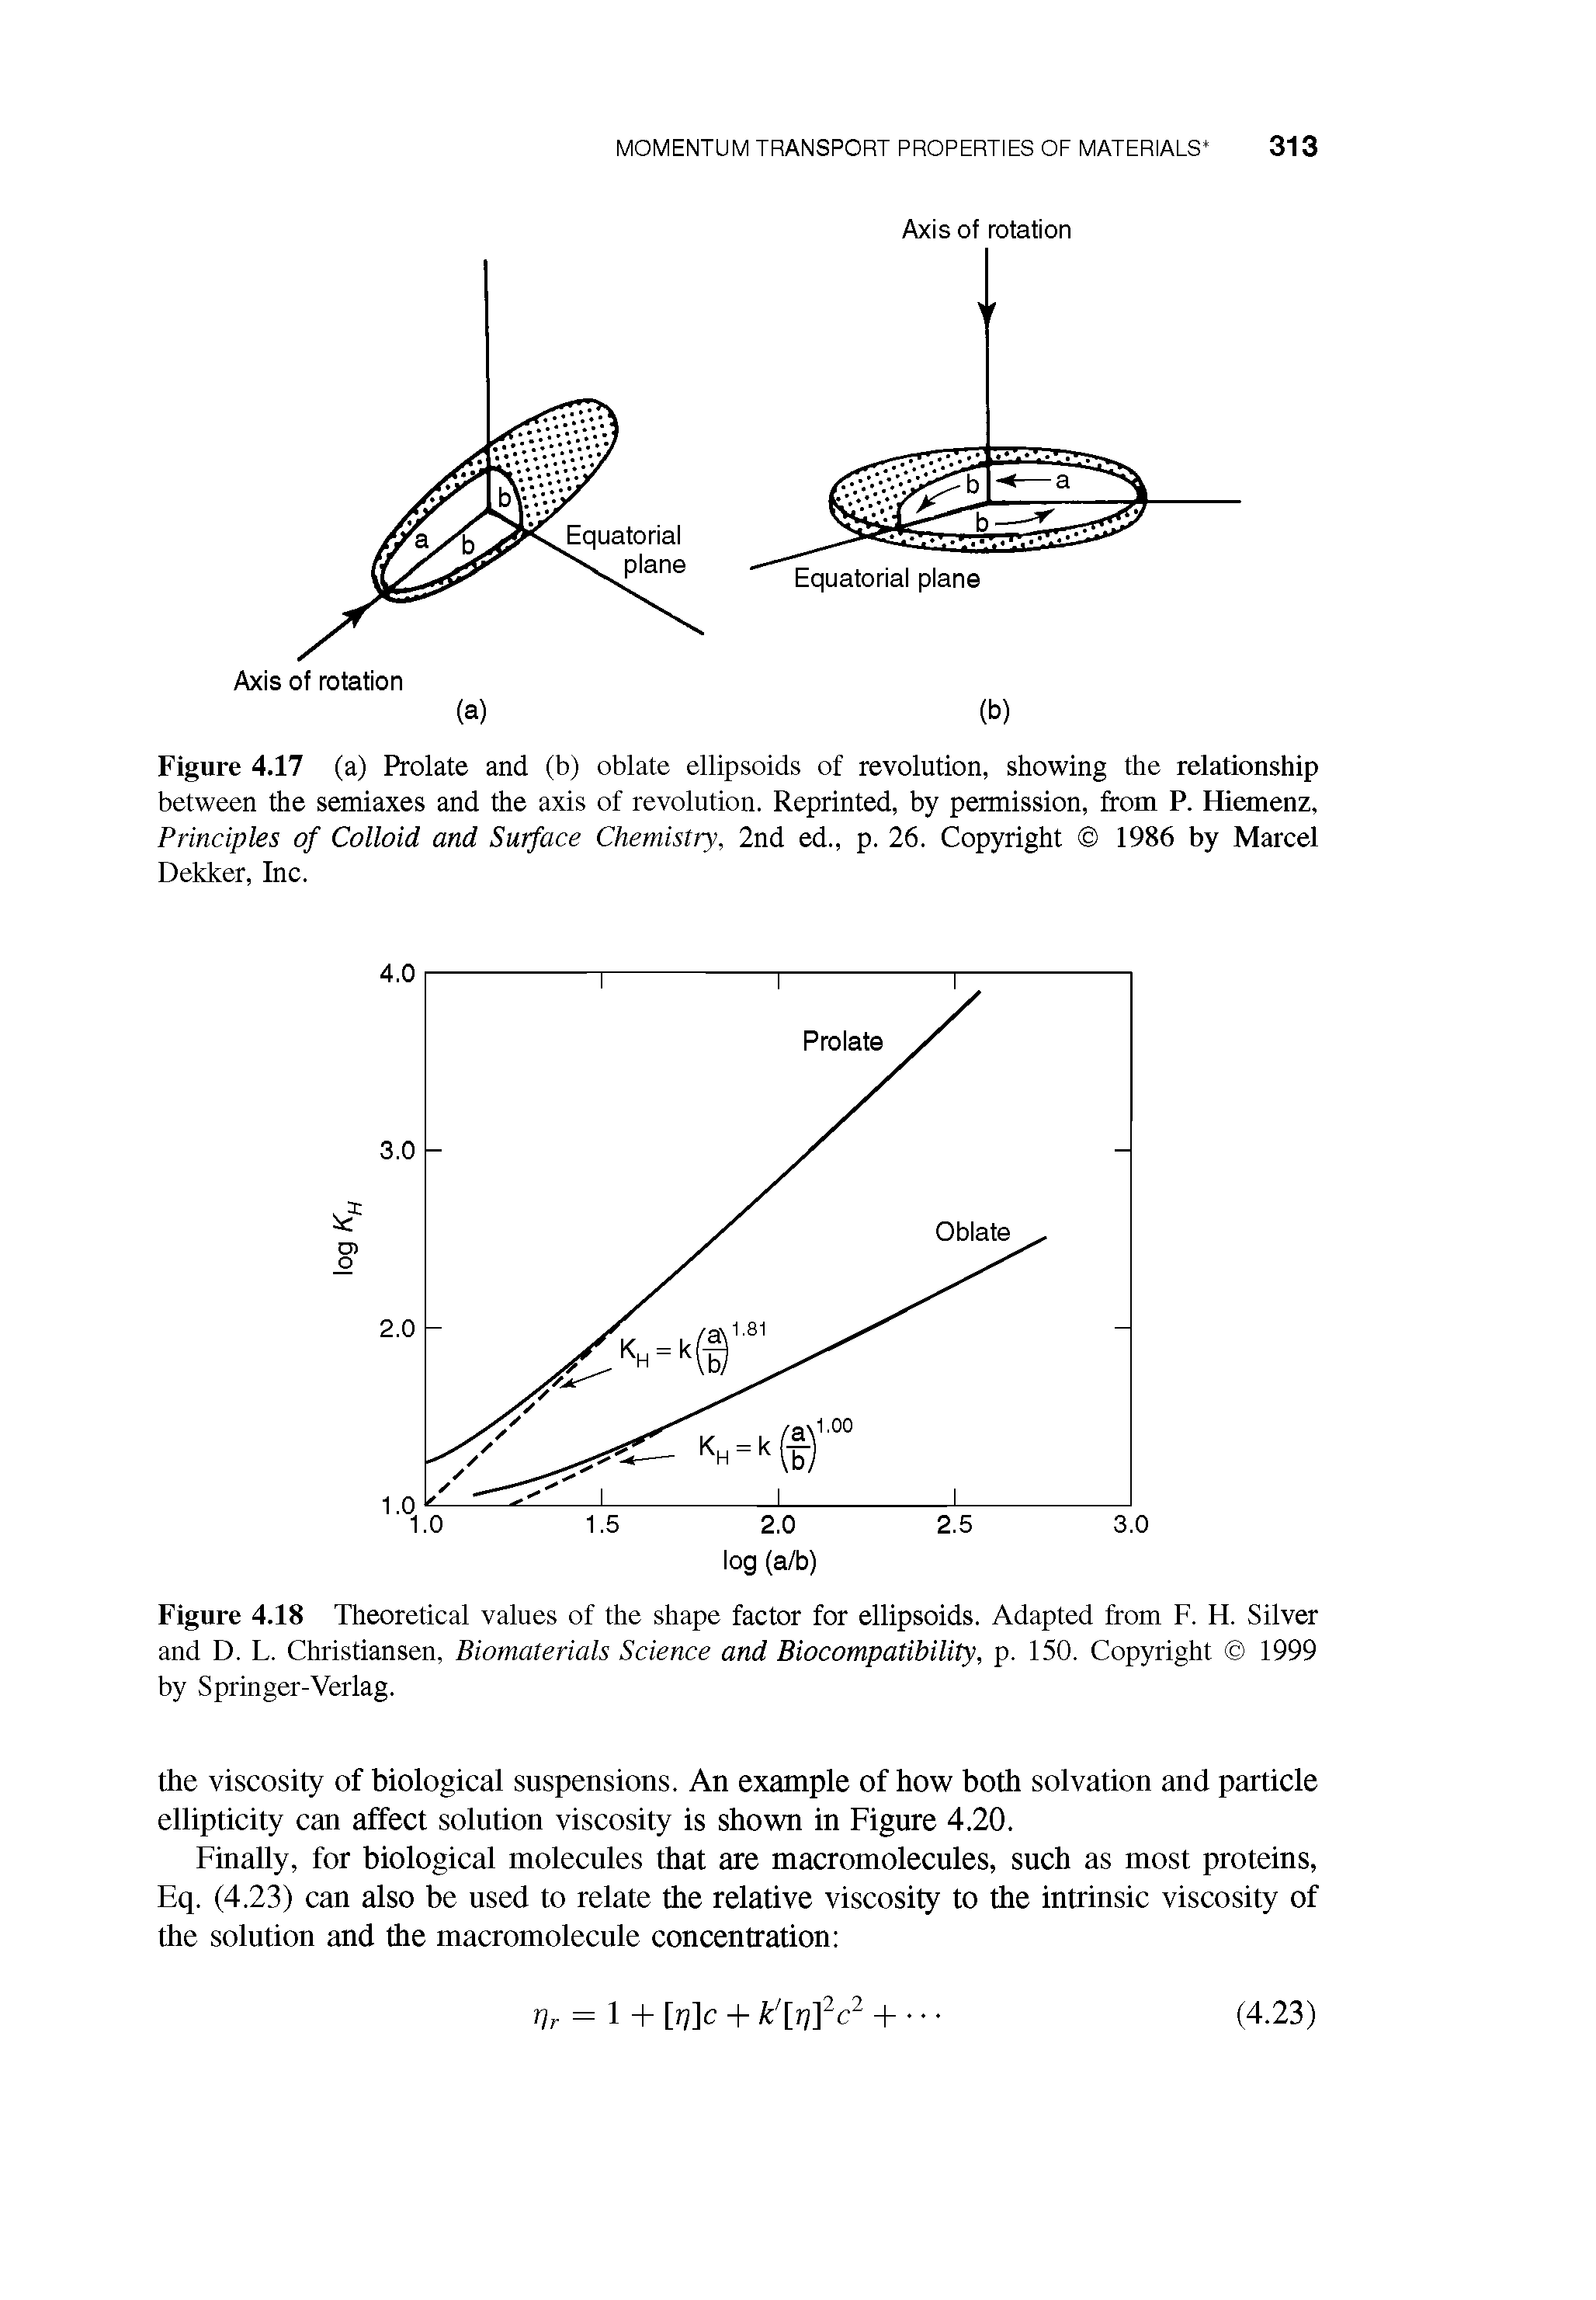 Figure 4.18 Theoretical values of the shape factor for ellipsoids. Adapted from F. H. Silver and D. L. Christiansen, Biomaterials Science and Biocompatibility, p. 150. Copyright 1999 by Springer-Verlag.